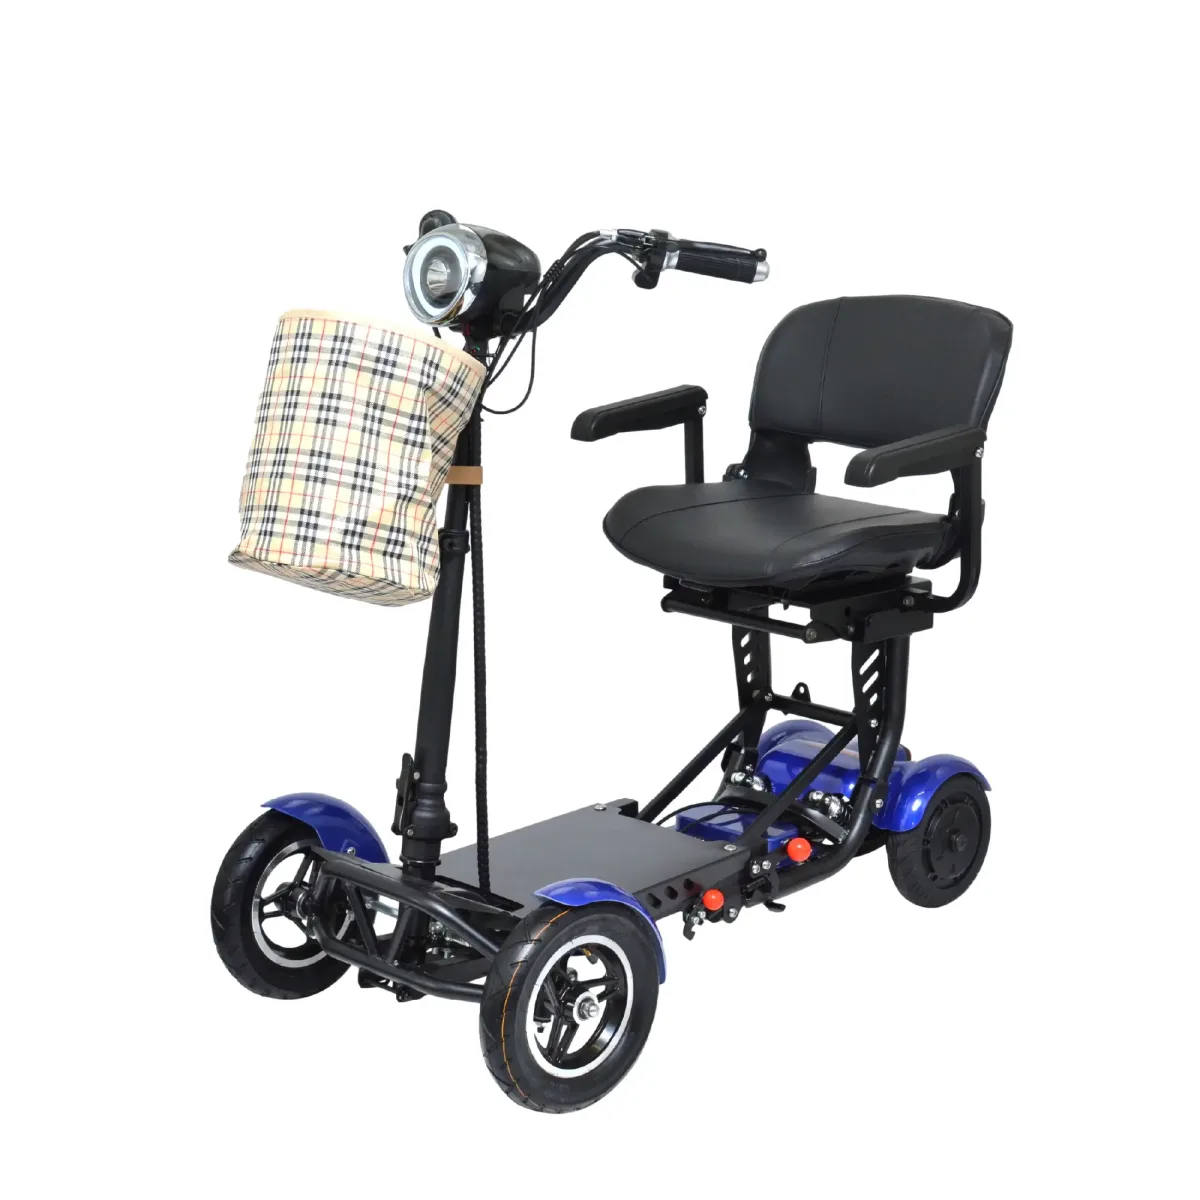 MS-3000 Foldable Mobility Scooter 400-500 lbs 3